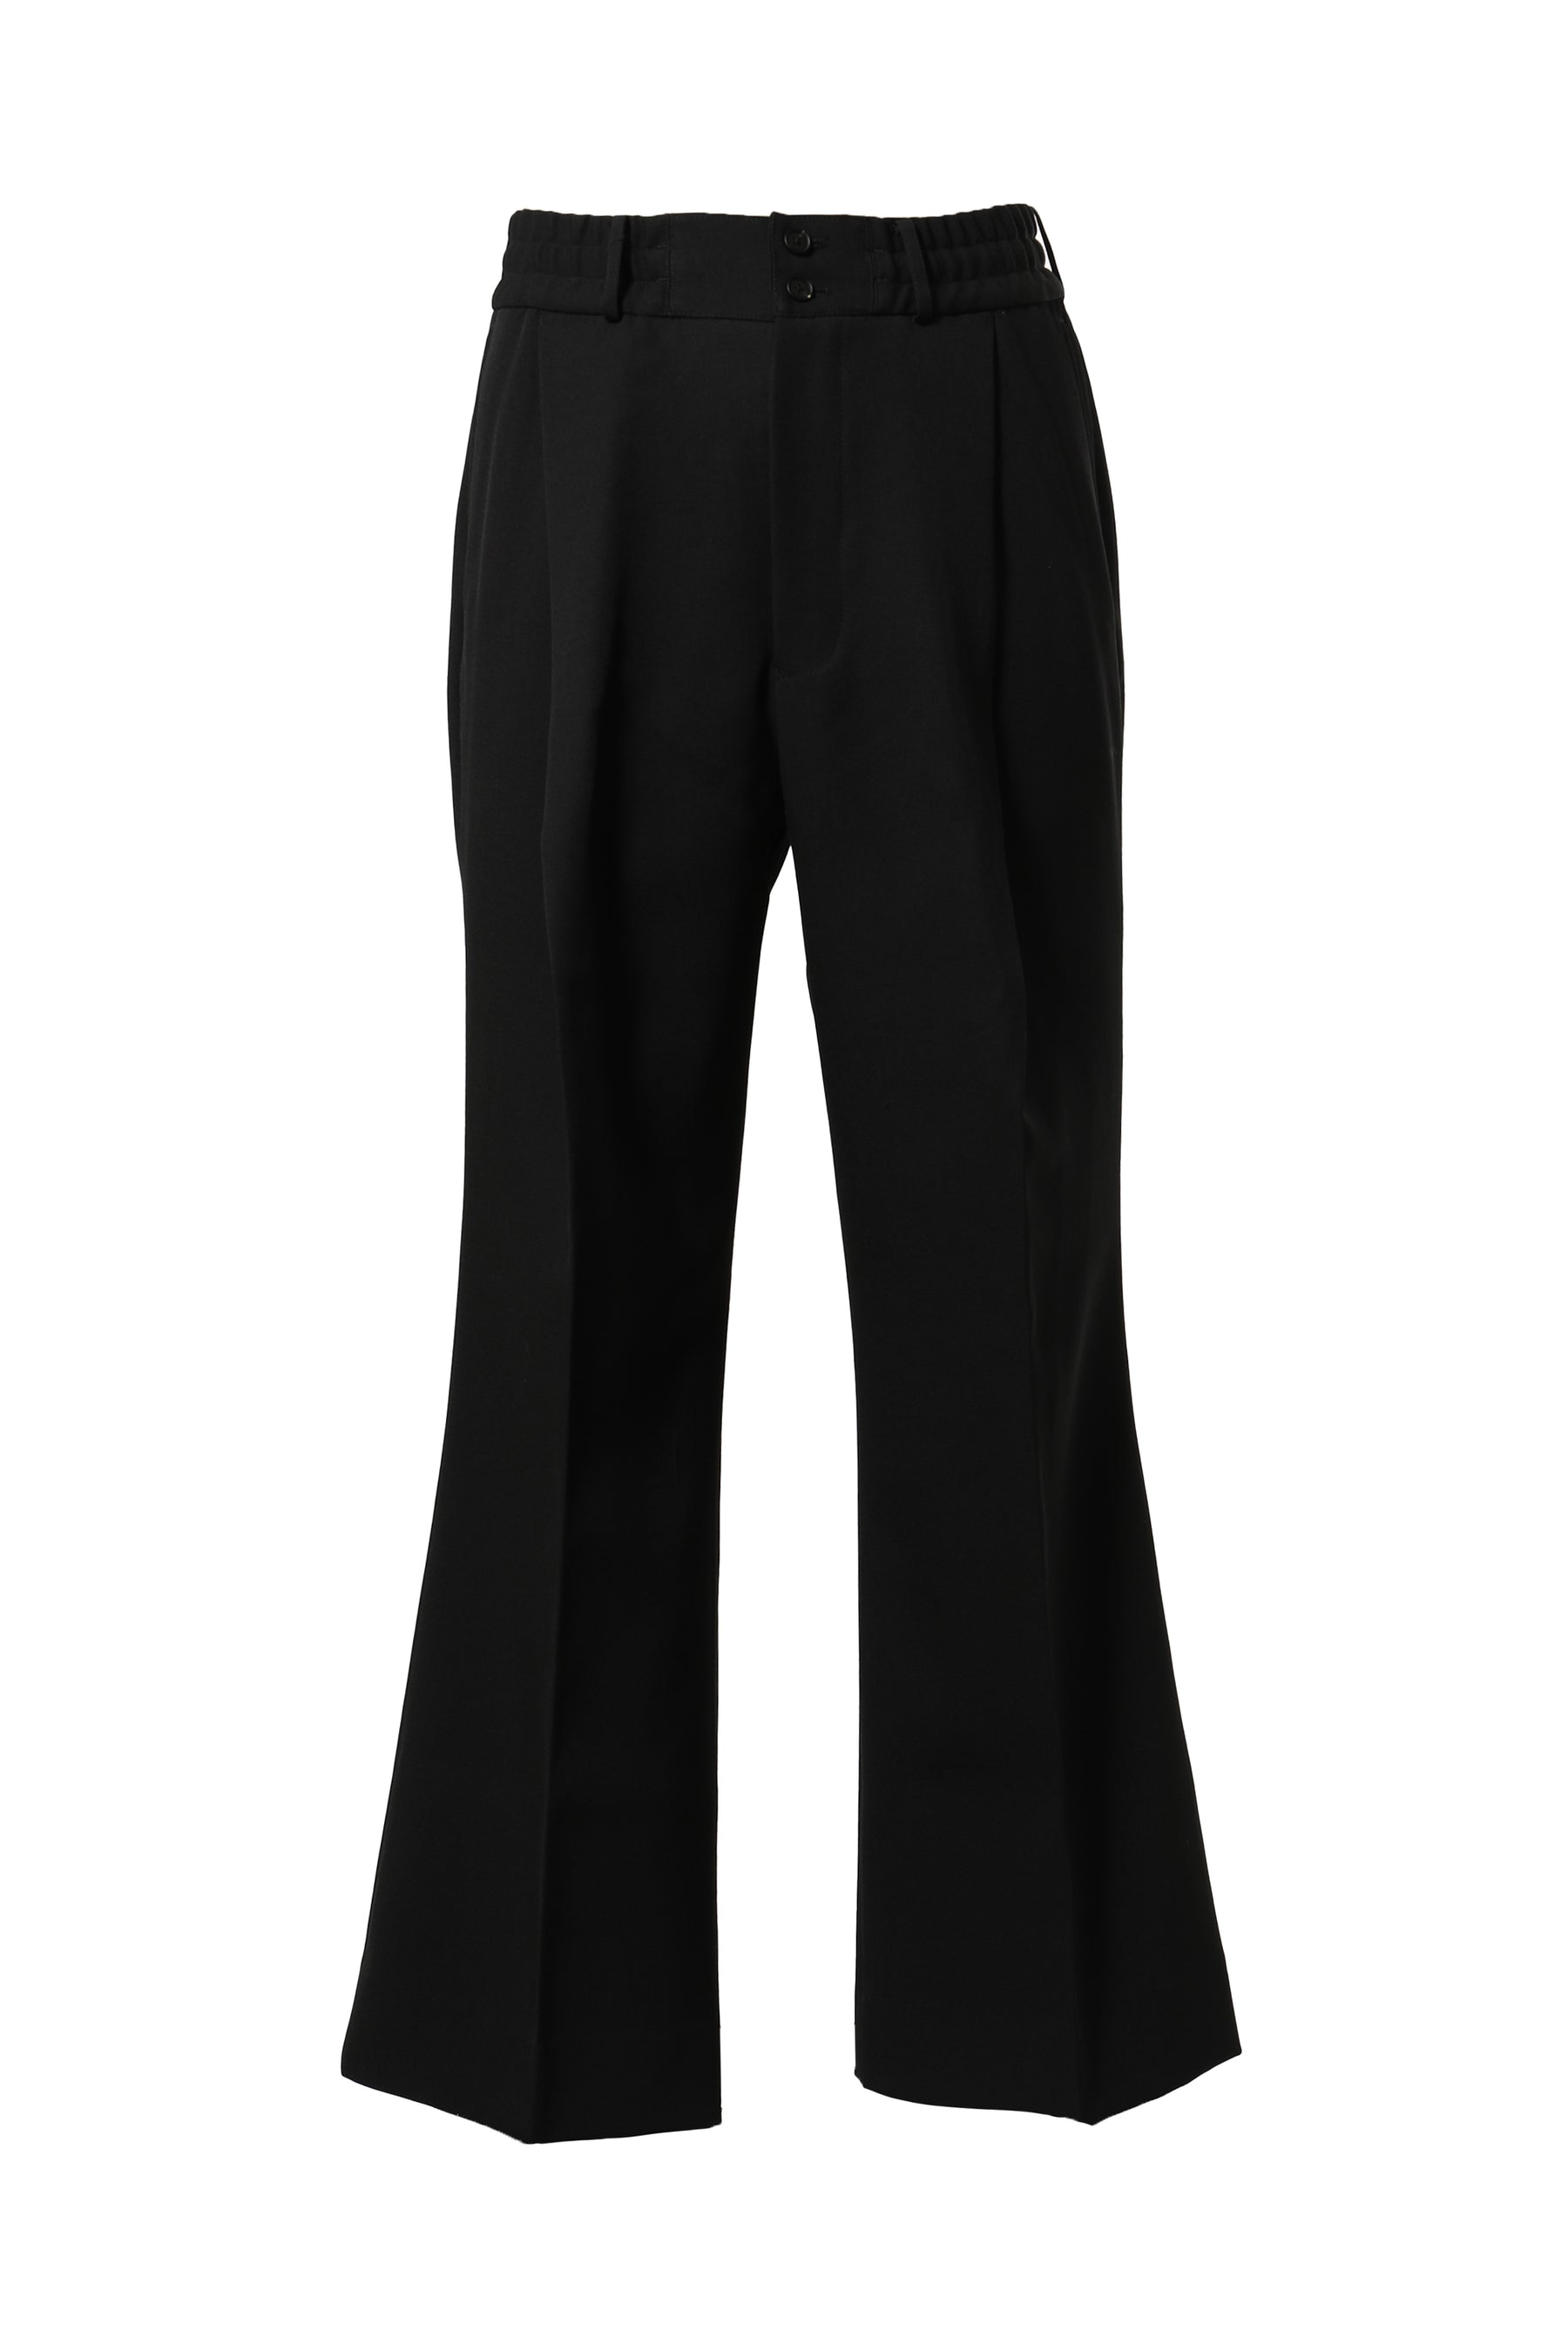 SUBLATIONS FW23 HEAVY WOOL GABARDINE FLARE EASY TROUSERS .10 / BLK